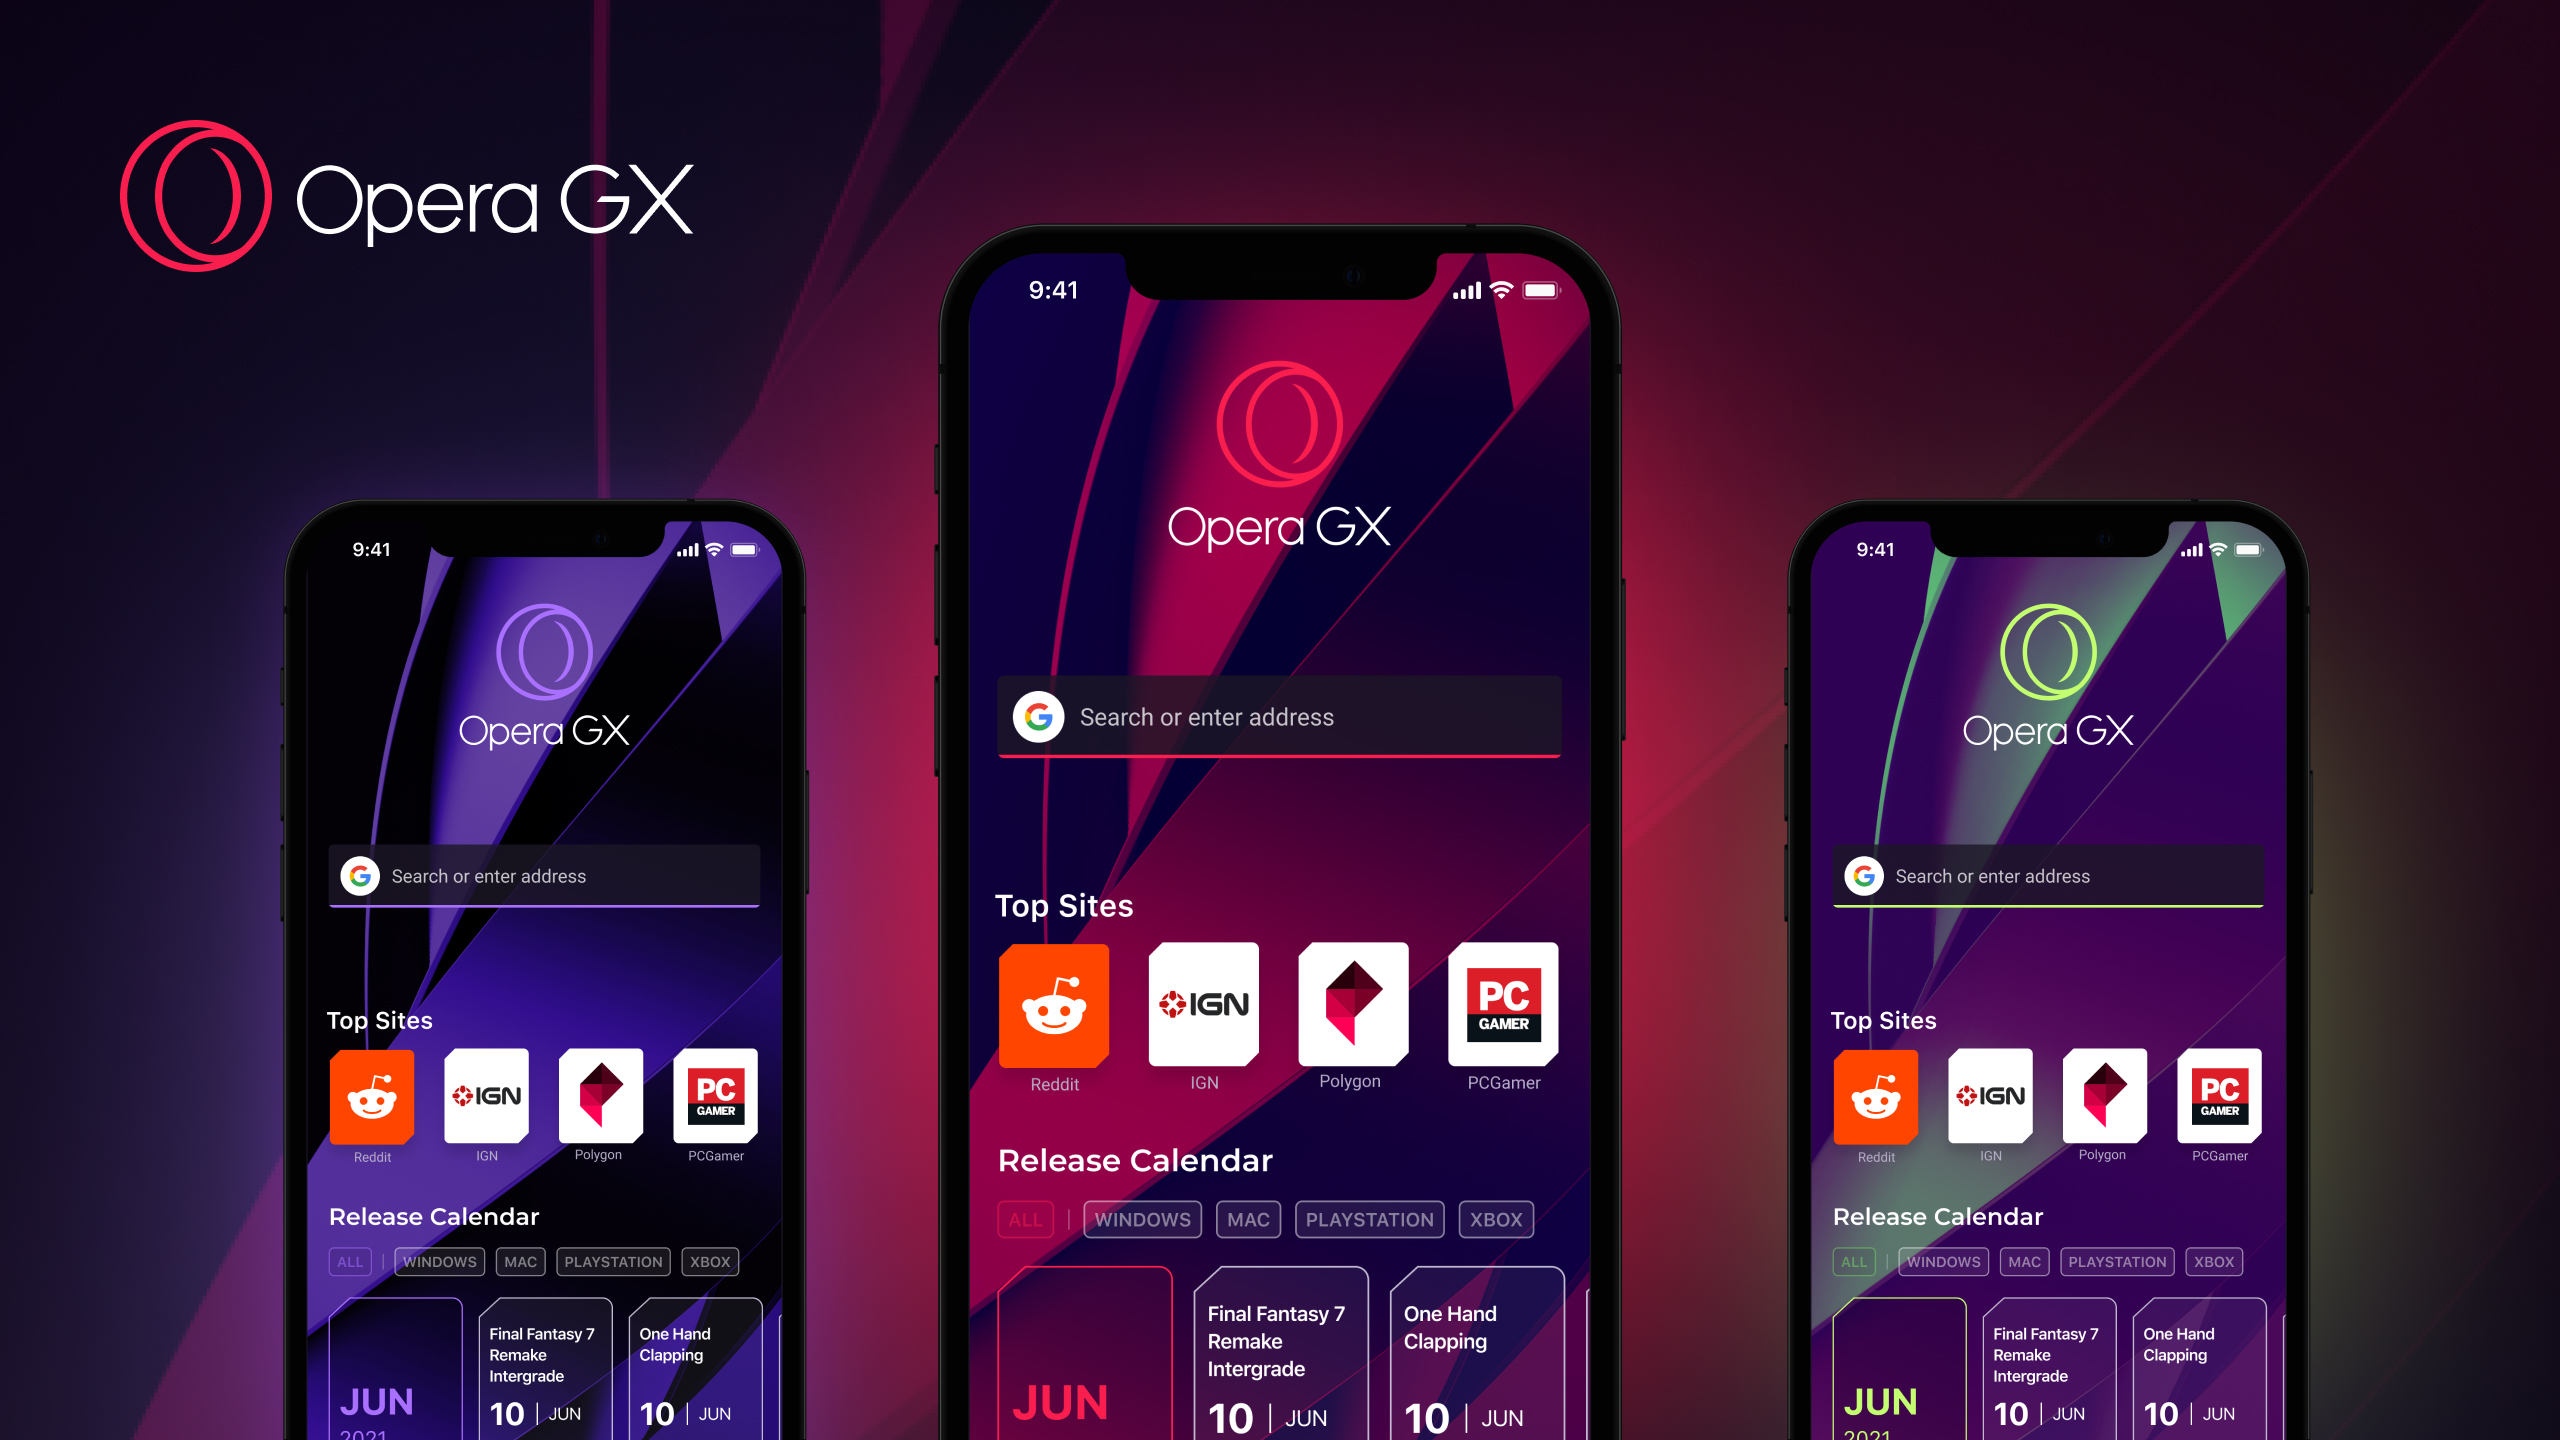 Opera GX Mobile Beta Launched as 'World's First Mobile Browser for